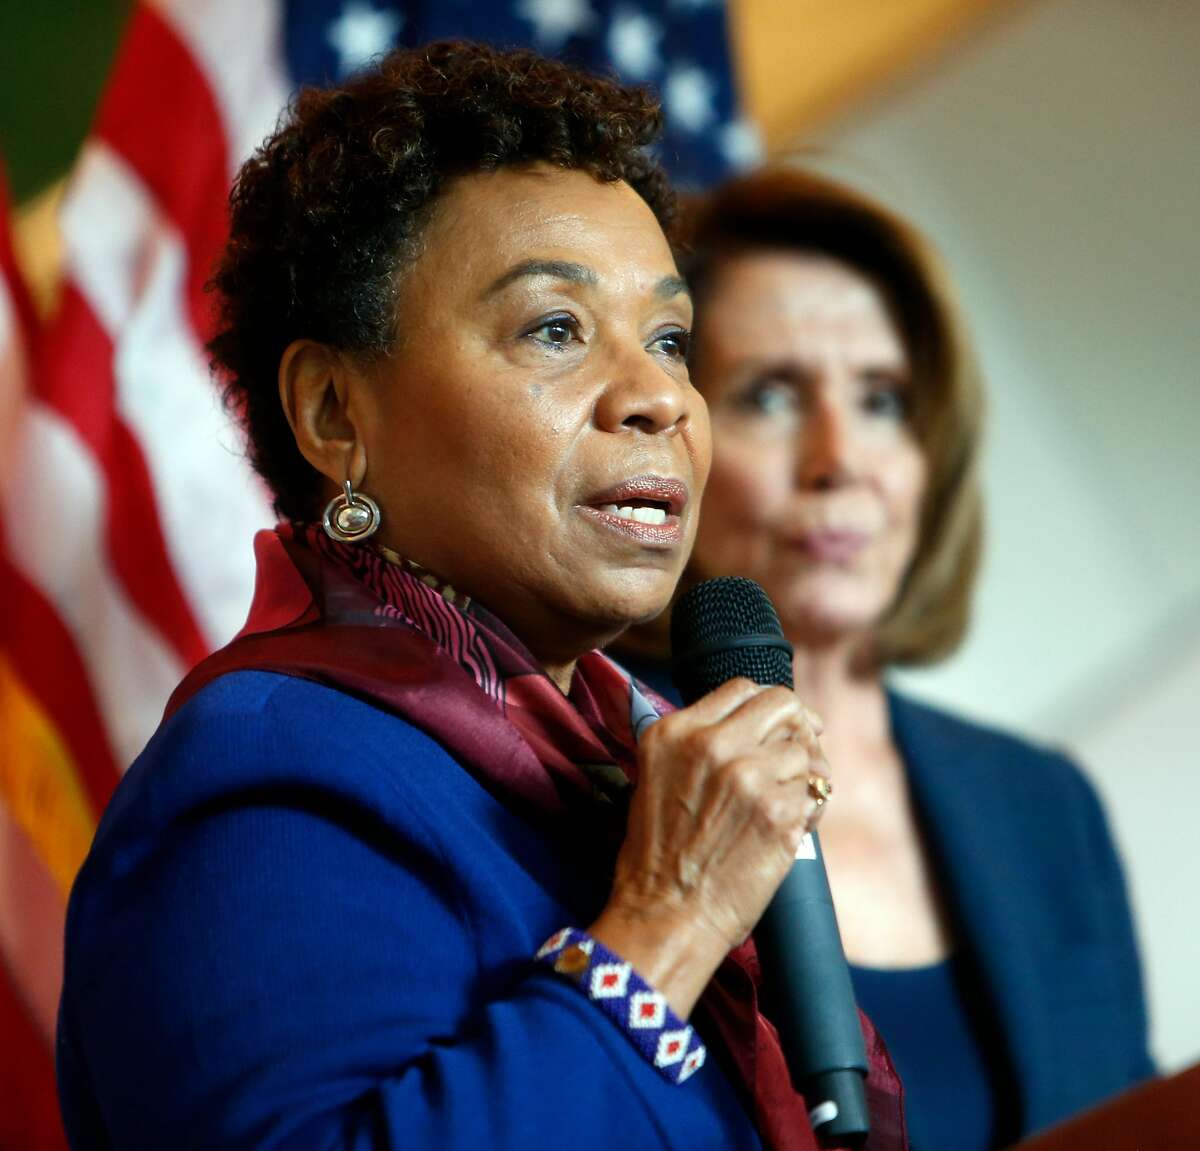 Rep. Barbara Lee, D-Calif. Lee released a statement on Twitter and also posted, "Inauguration should be a celebration. But we have nothing to celebrate on Jan 20. Instead of attending, I will be organizing."